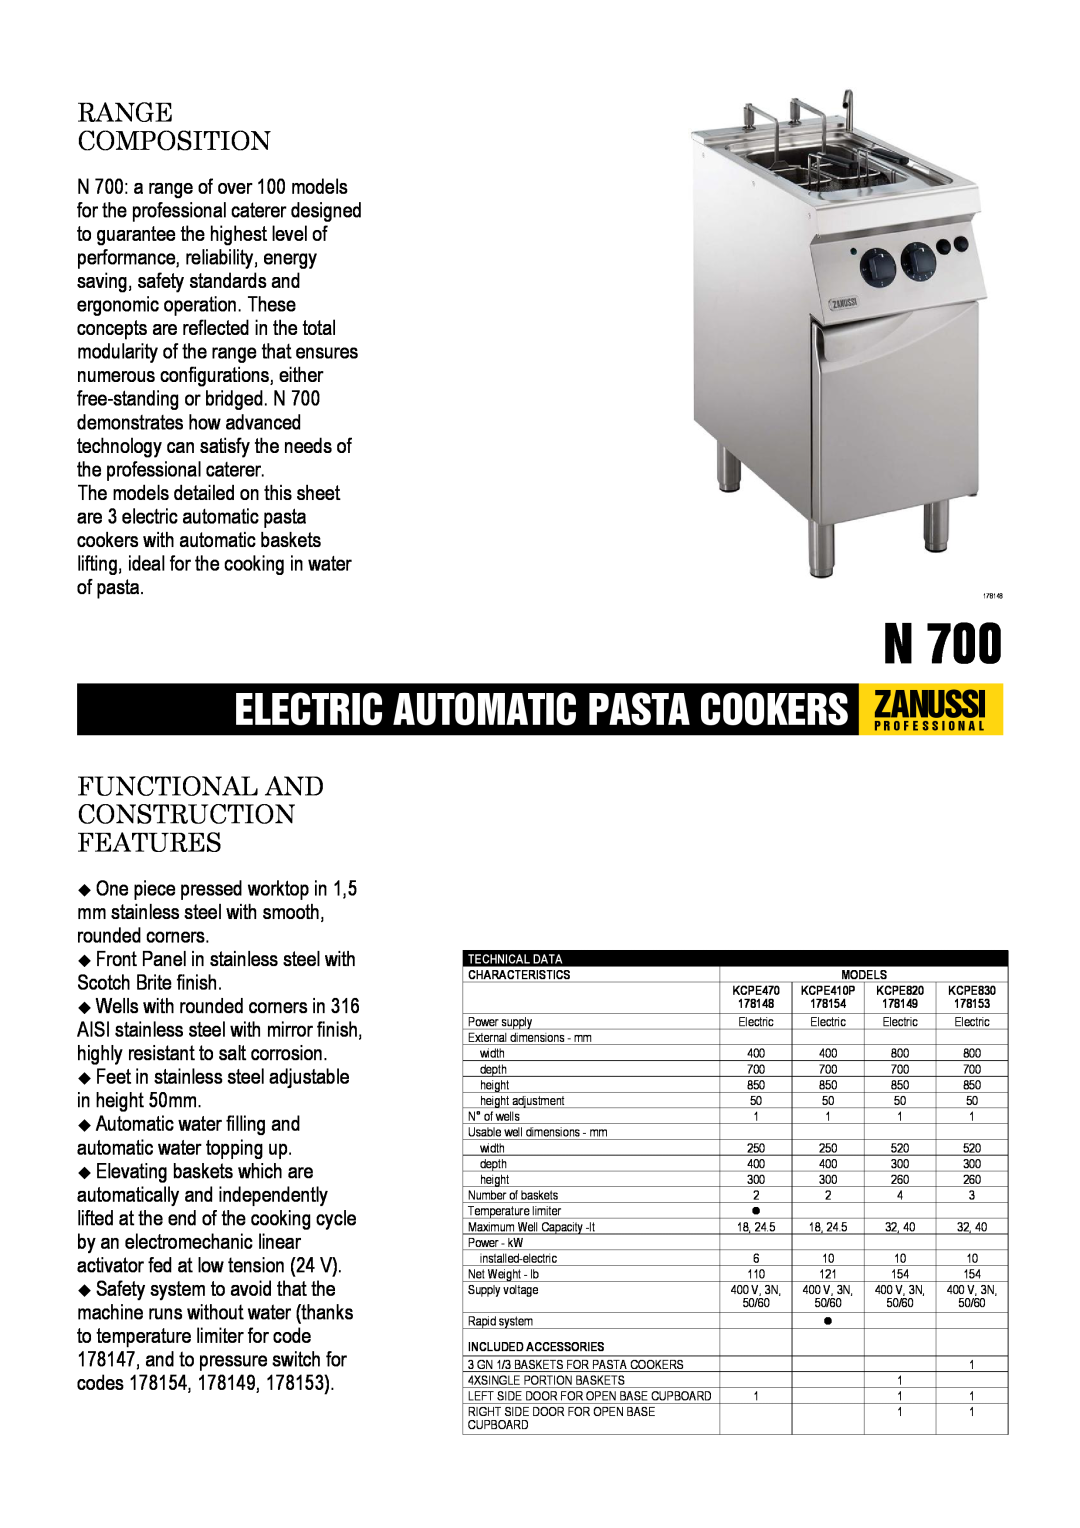 Electrolux KCPE820, KCPE470, KCPE410P, KCPE830 dimensions Range Composition, Functional And Construction Features 